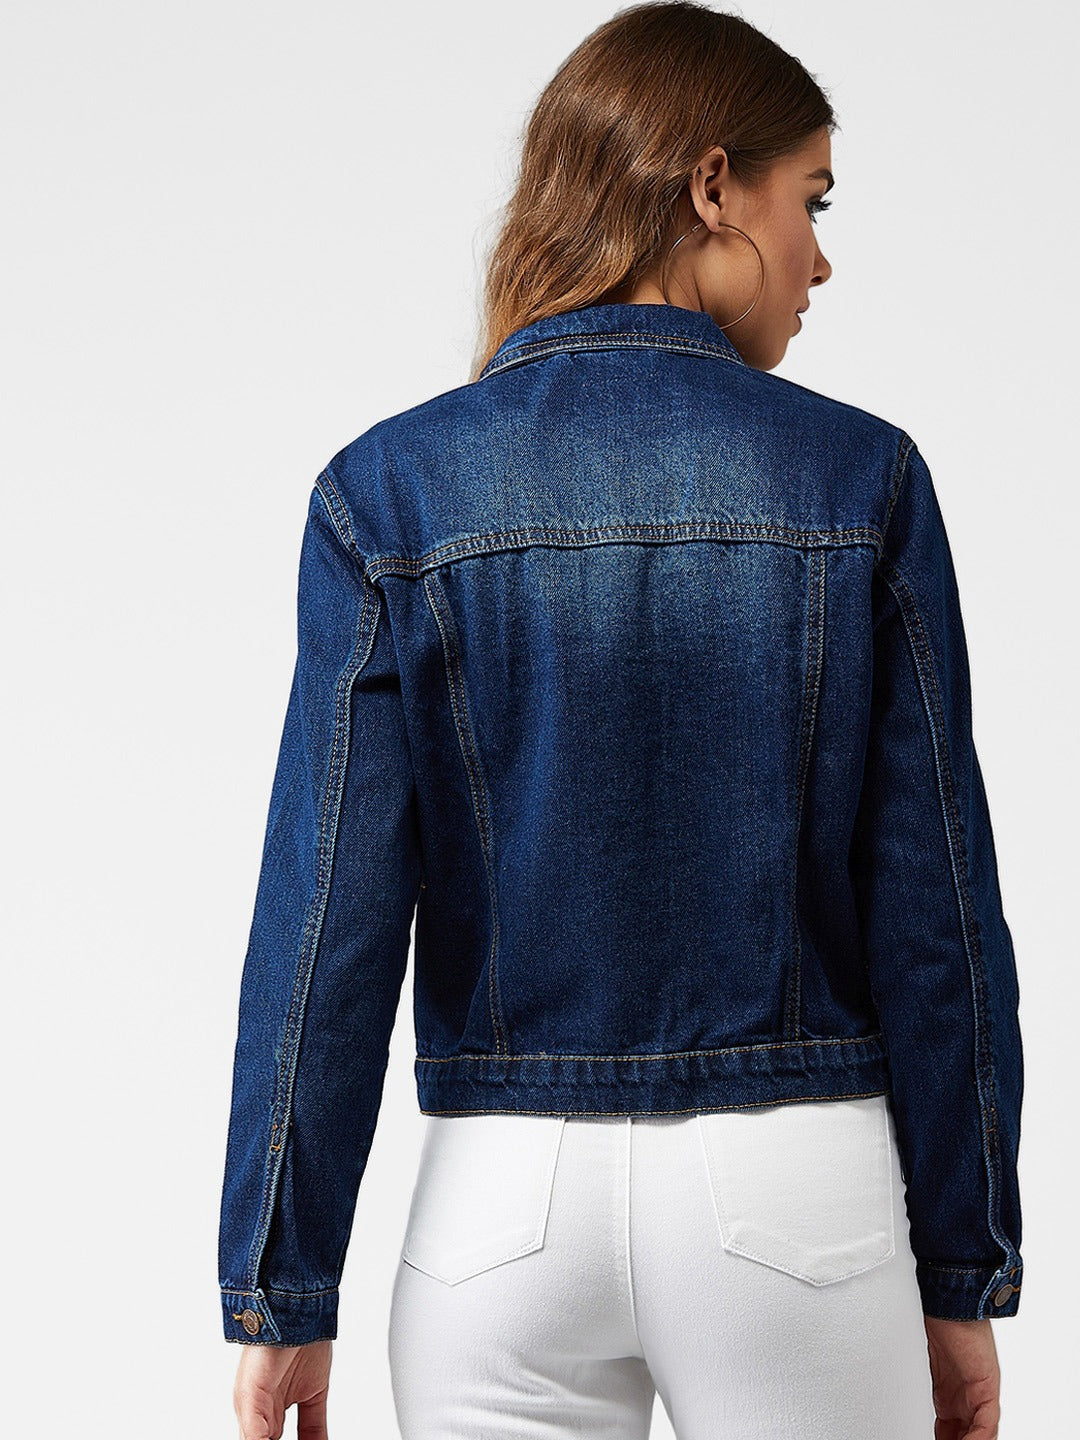 Blue Denim Jacket for Women - Stylish Cropped Casual Outerwear